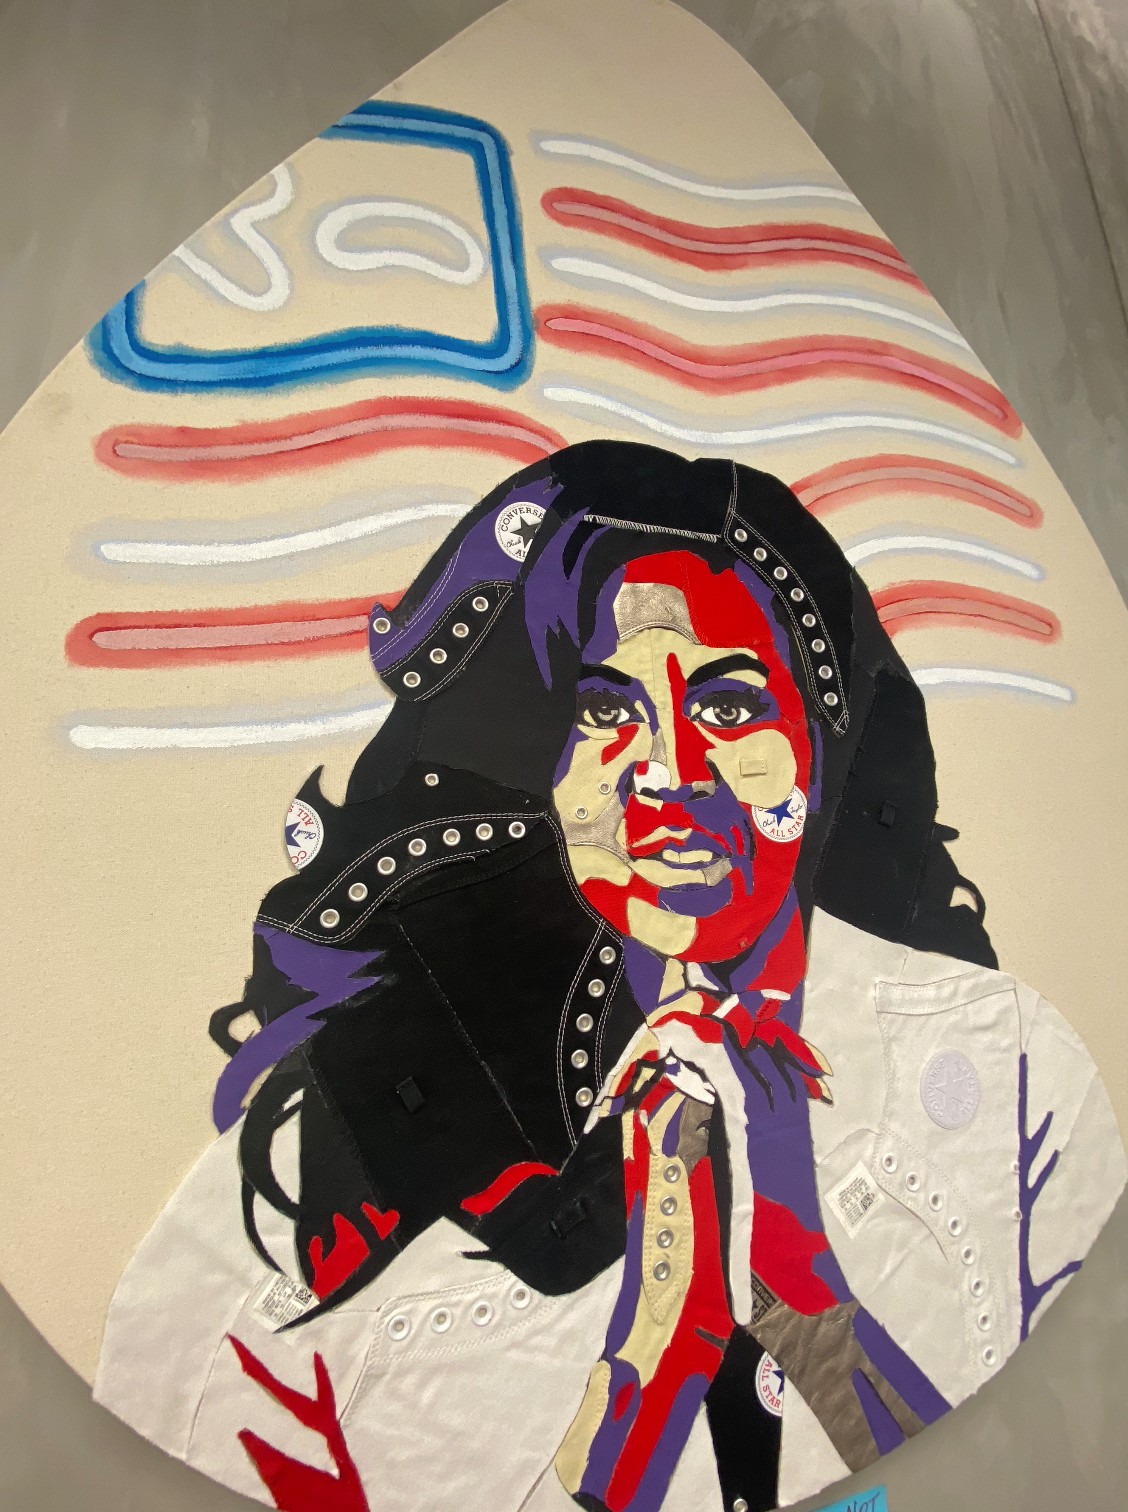 rumble chicago art of Michelle Obama